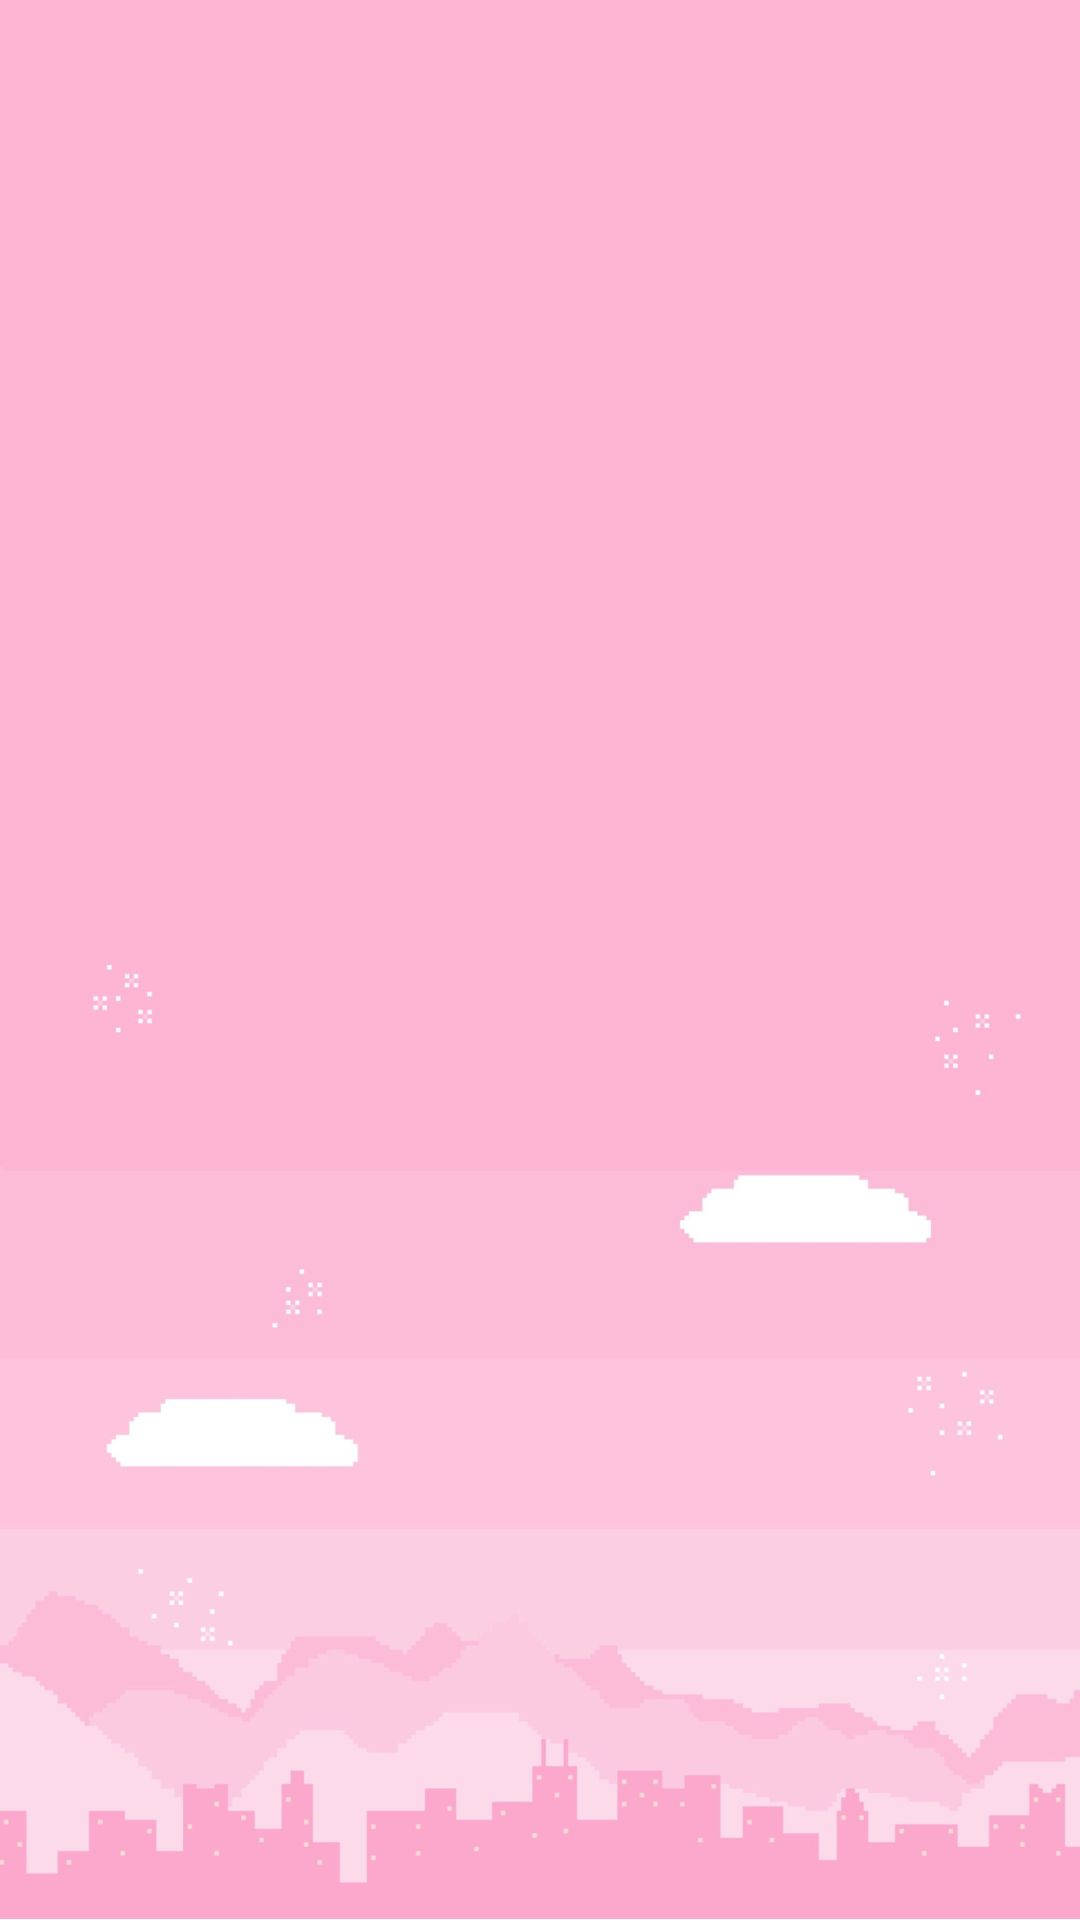 Aesthetic Pink Sky Background